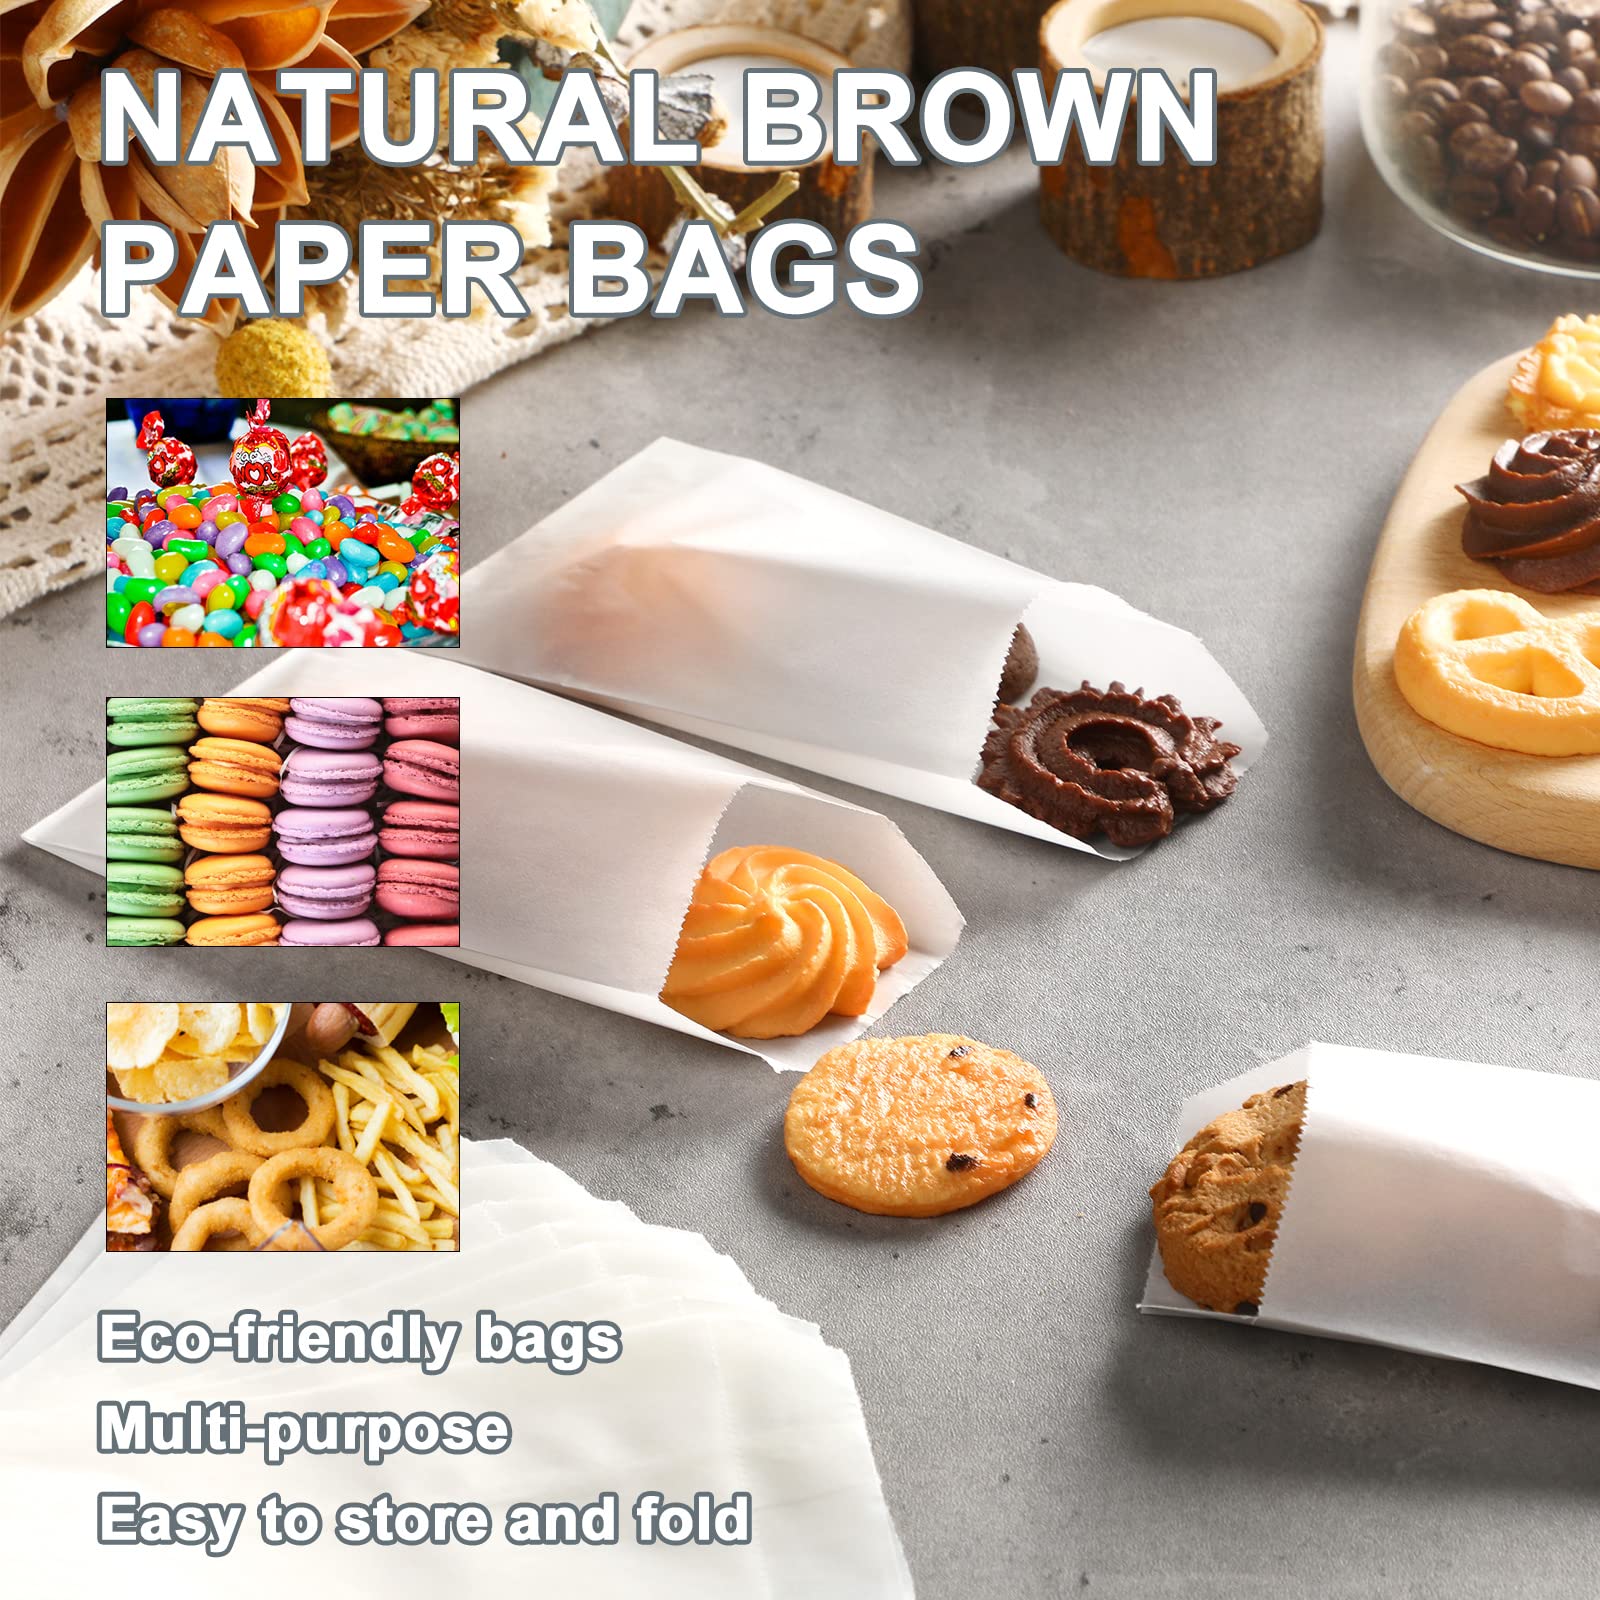 600 Pieces Flat Glassine Waxed Paper Treat Bags Semi Transparent Cookies Bags Sleeves for Bakery Cookies Candies Dessert Party Favor (3 x 5 Inch)